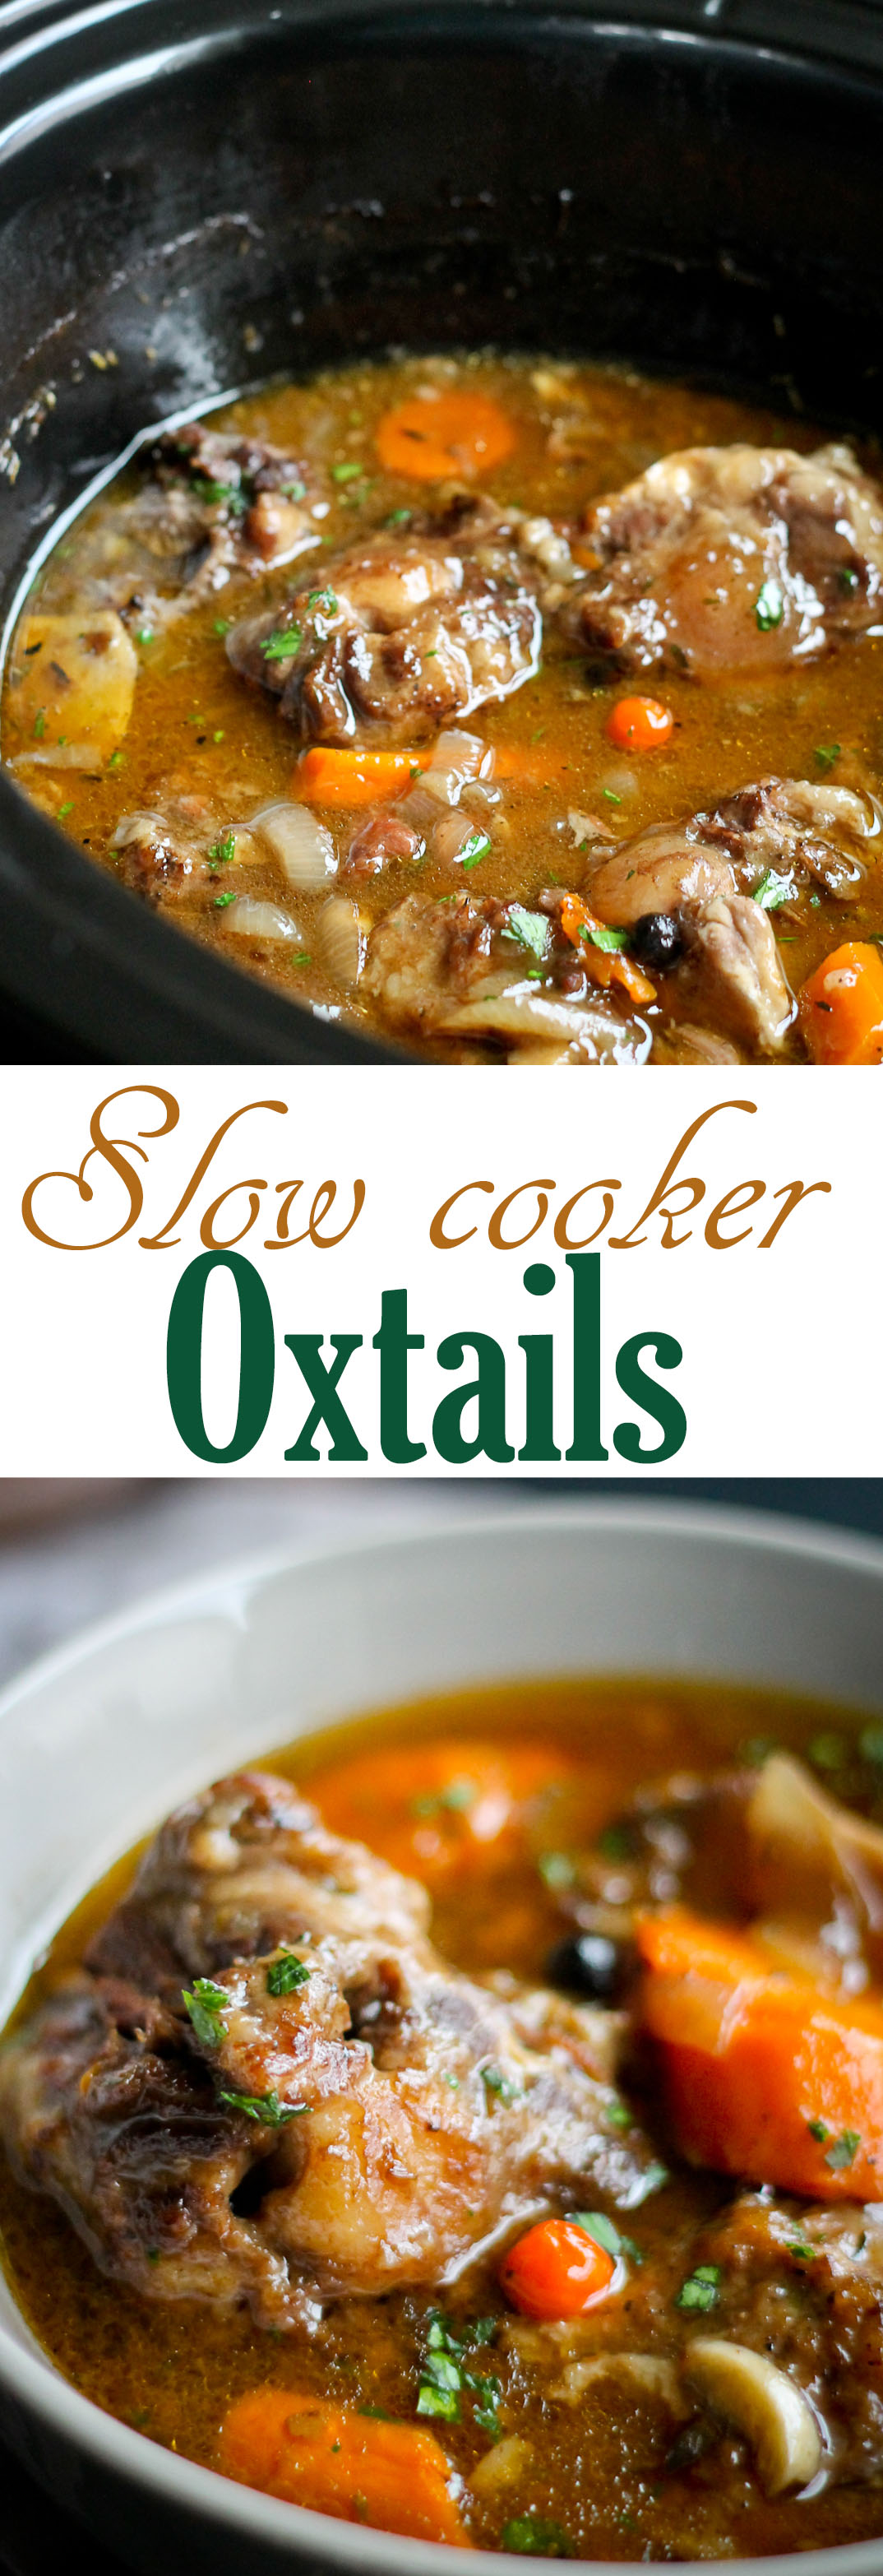 SLOW COOKER OXTAILS - Jehan Can Cook